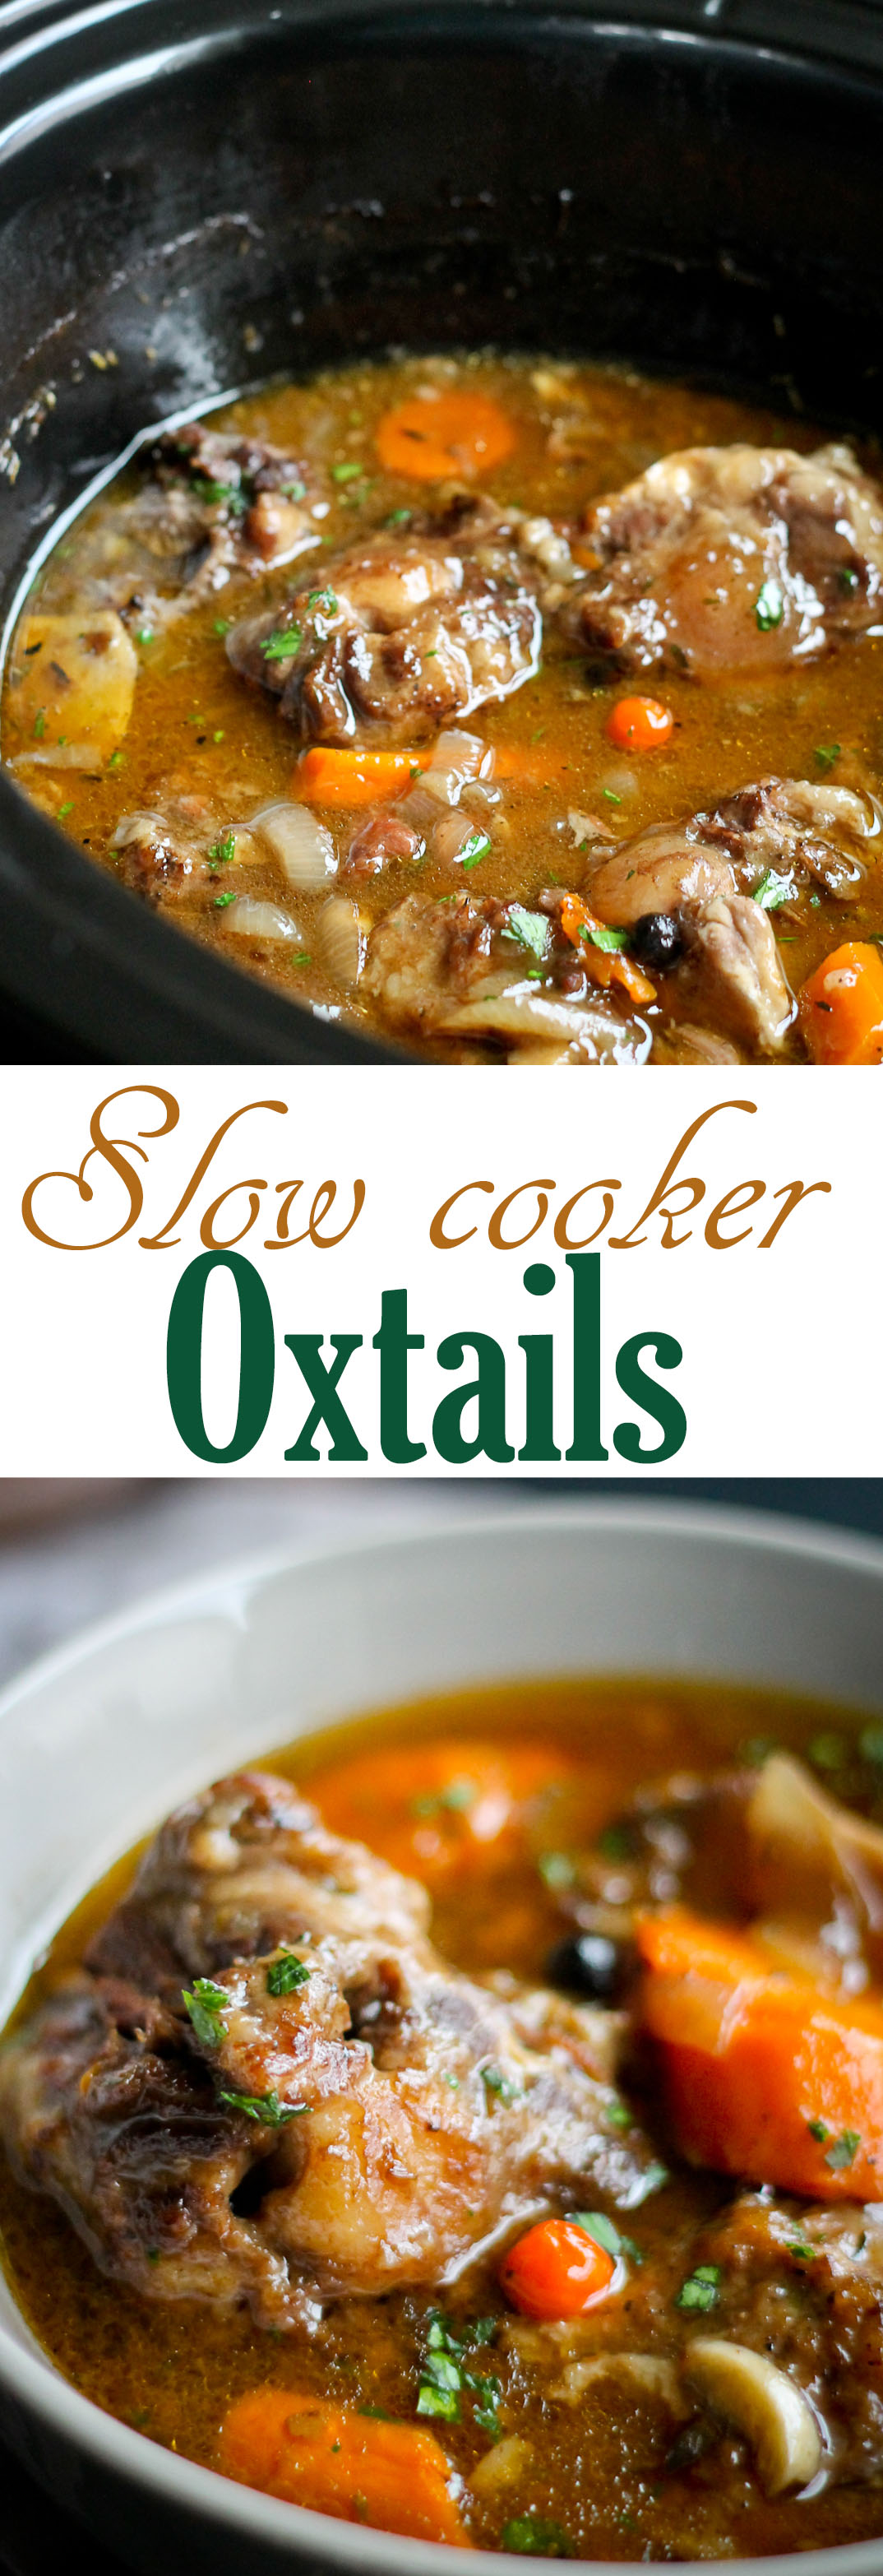 SLOW COOKER OXTAILS - Jehan Can Cook